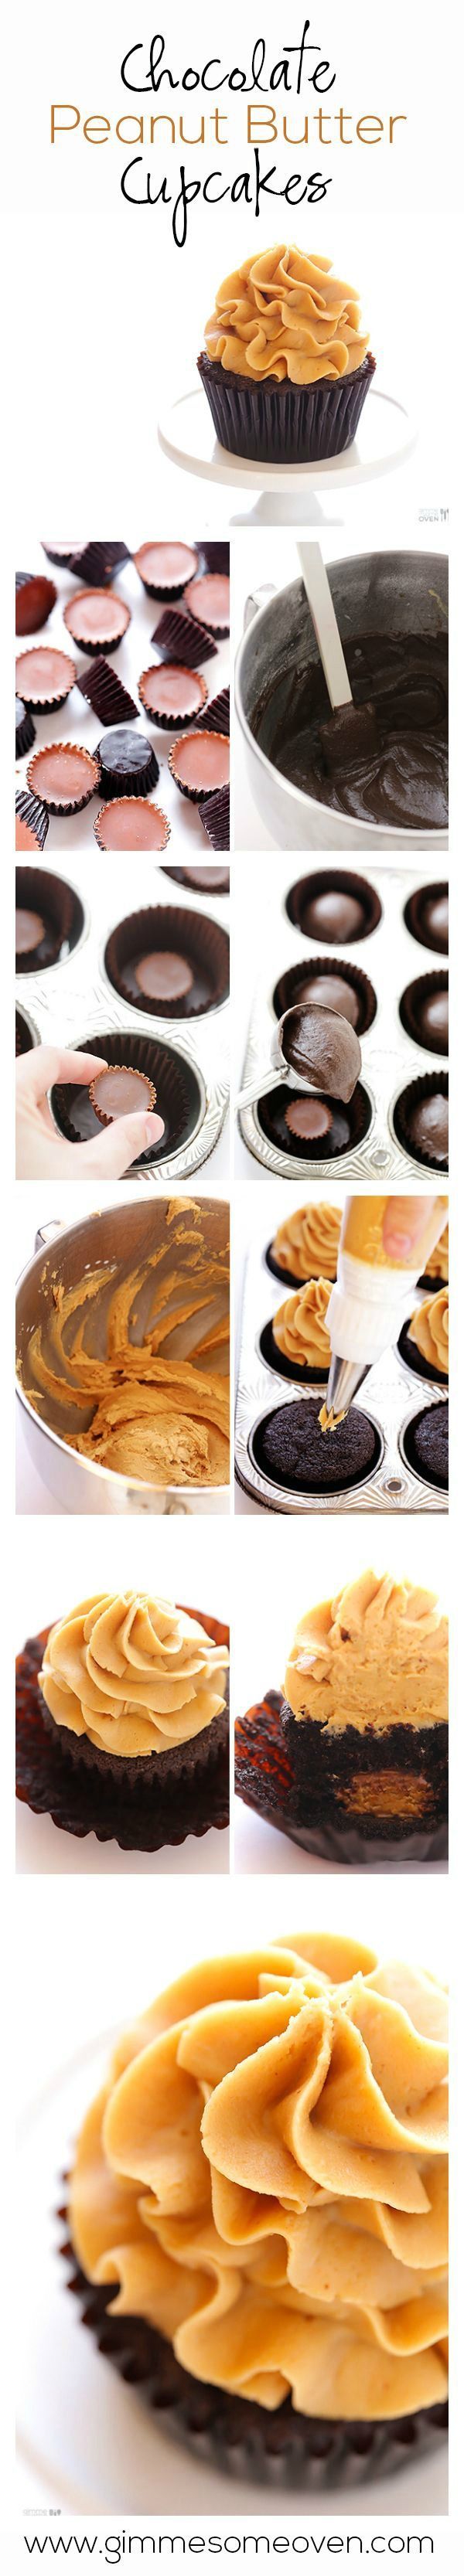 Give us some of these… NOW! Chocolate Peanut Butter #Cupcakes #peanutbutter #c